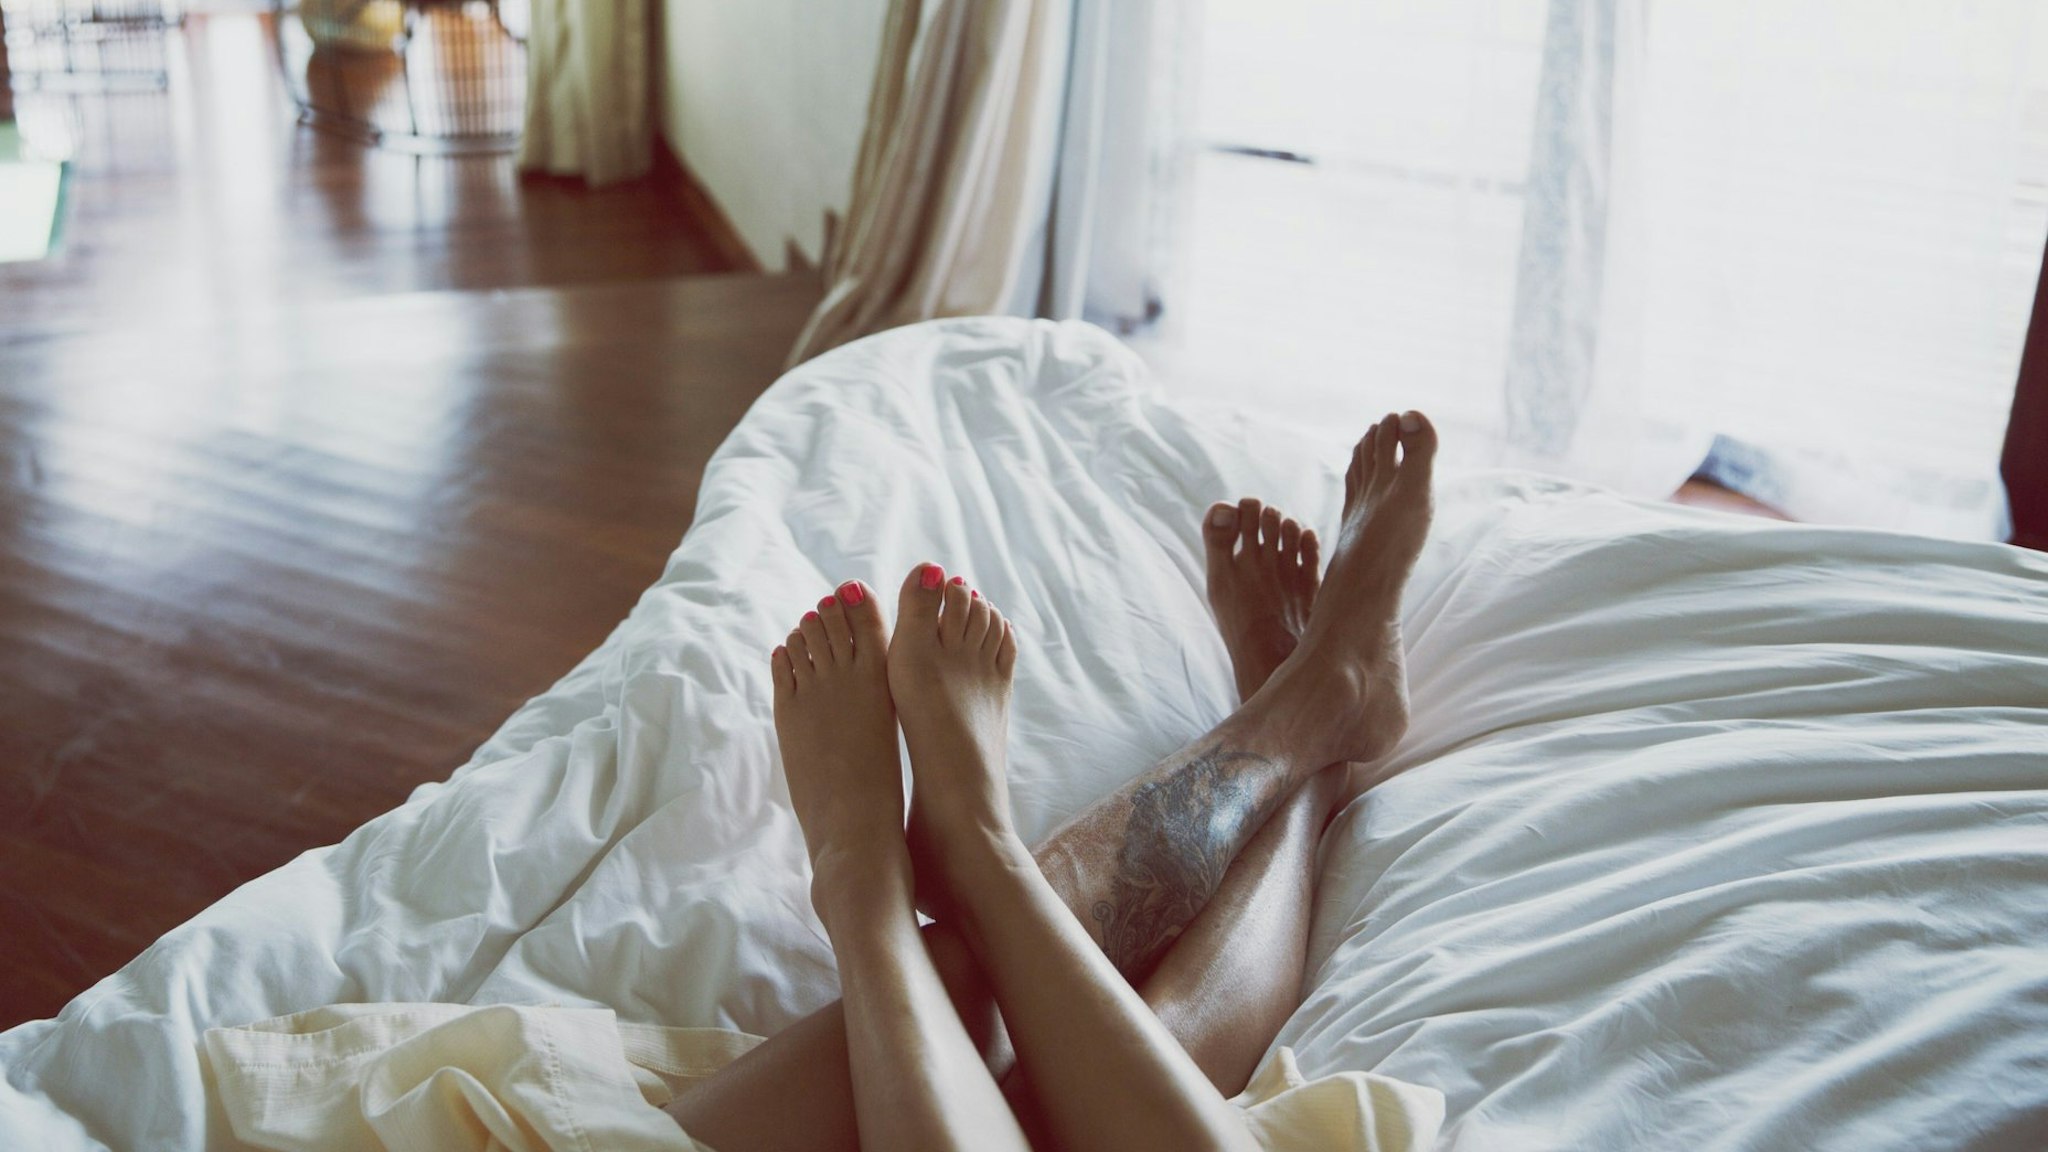 Two people relax in bed